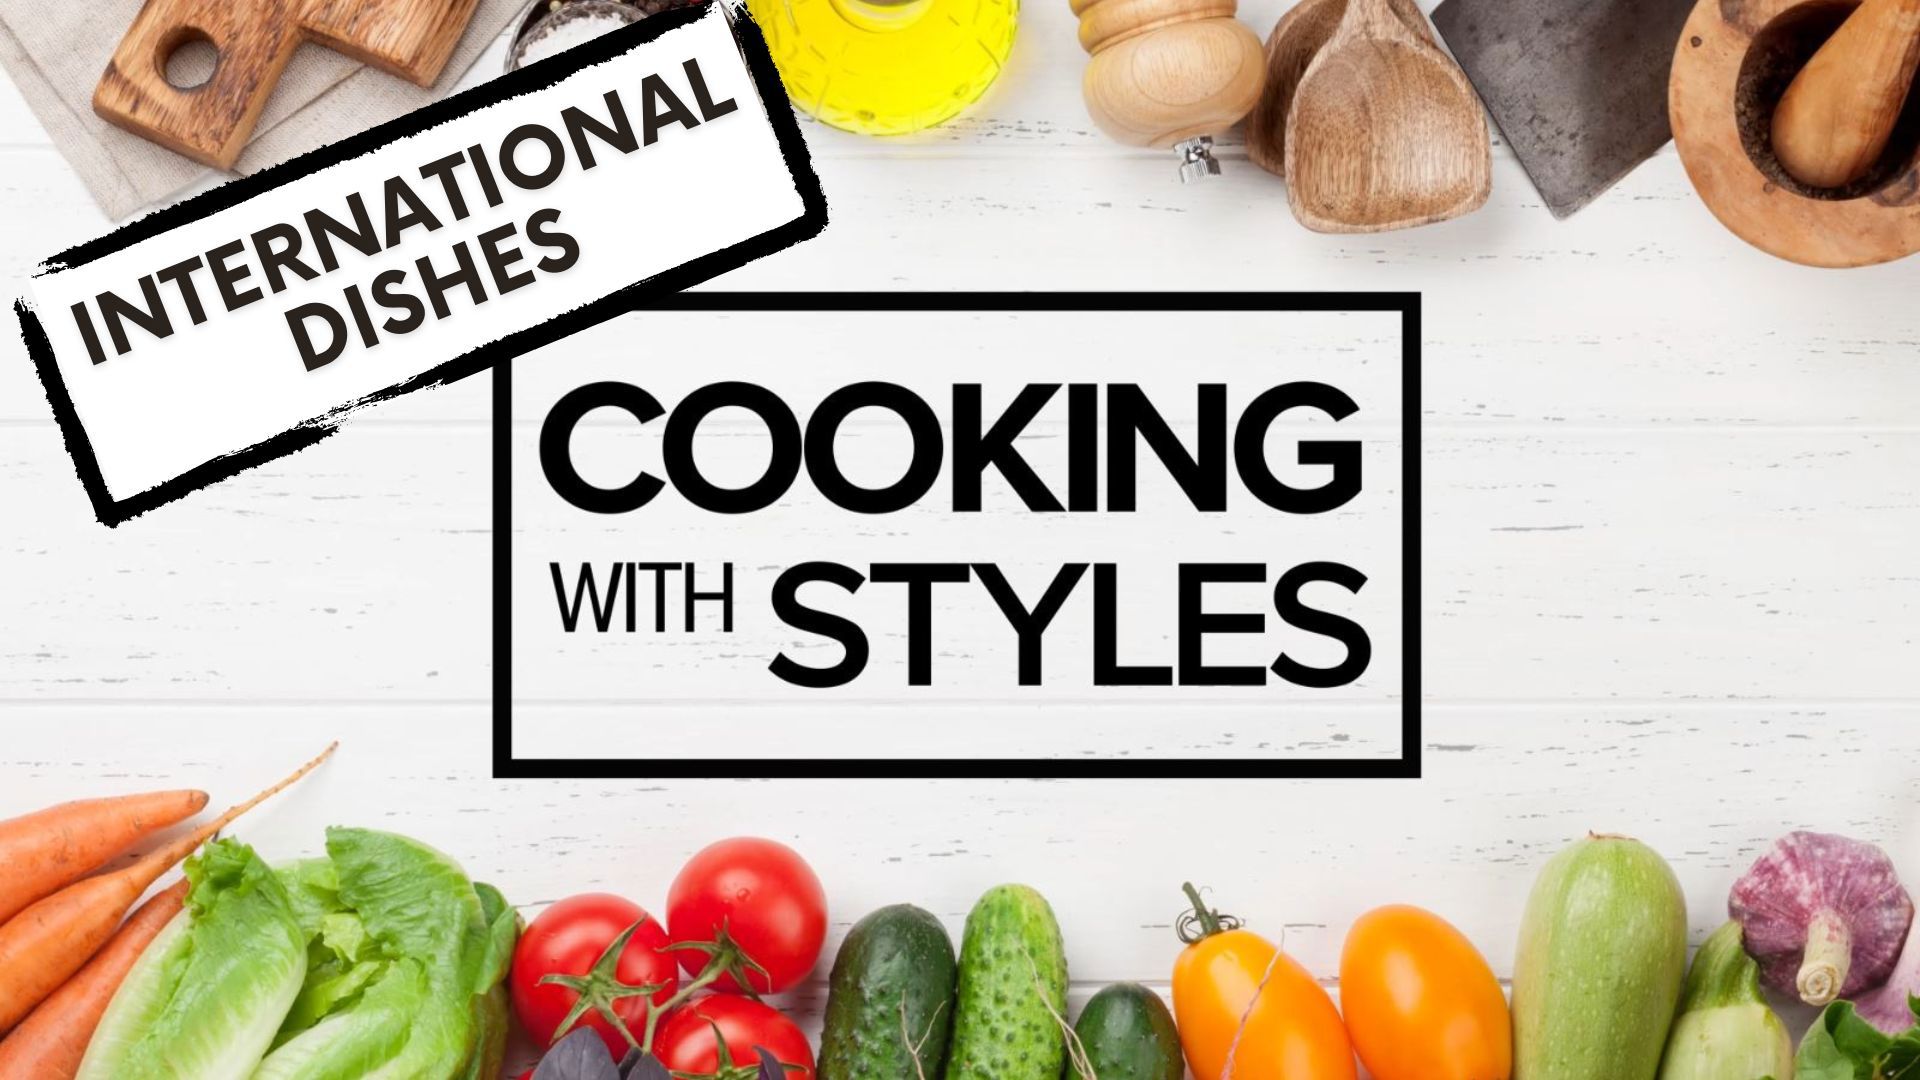 Shawn Styles takes us around the globe with these international dishes. From roasting a chicken like you're in France to a Caribbean stew, he has something for all.